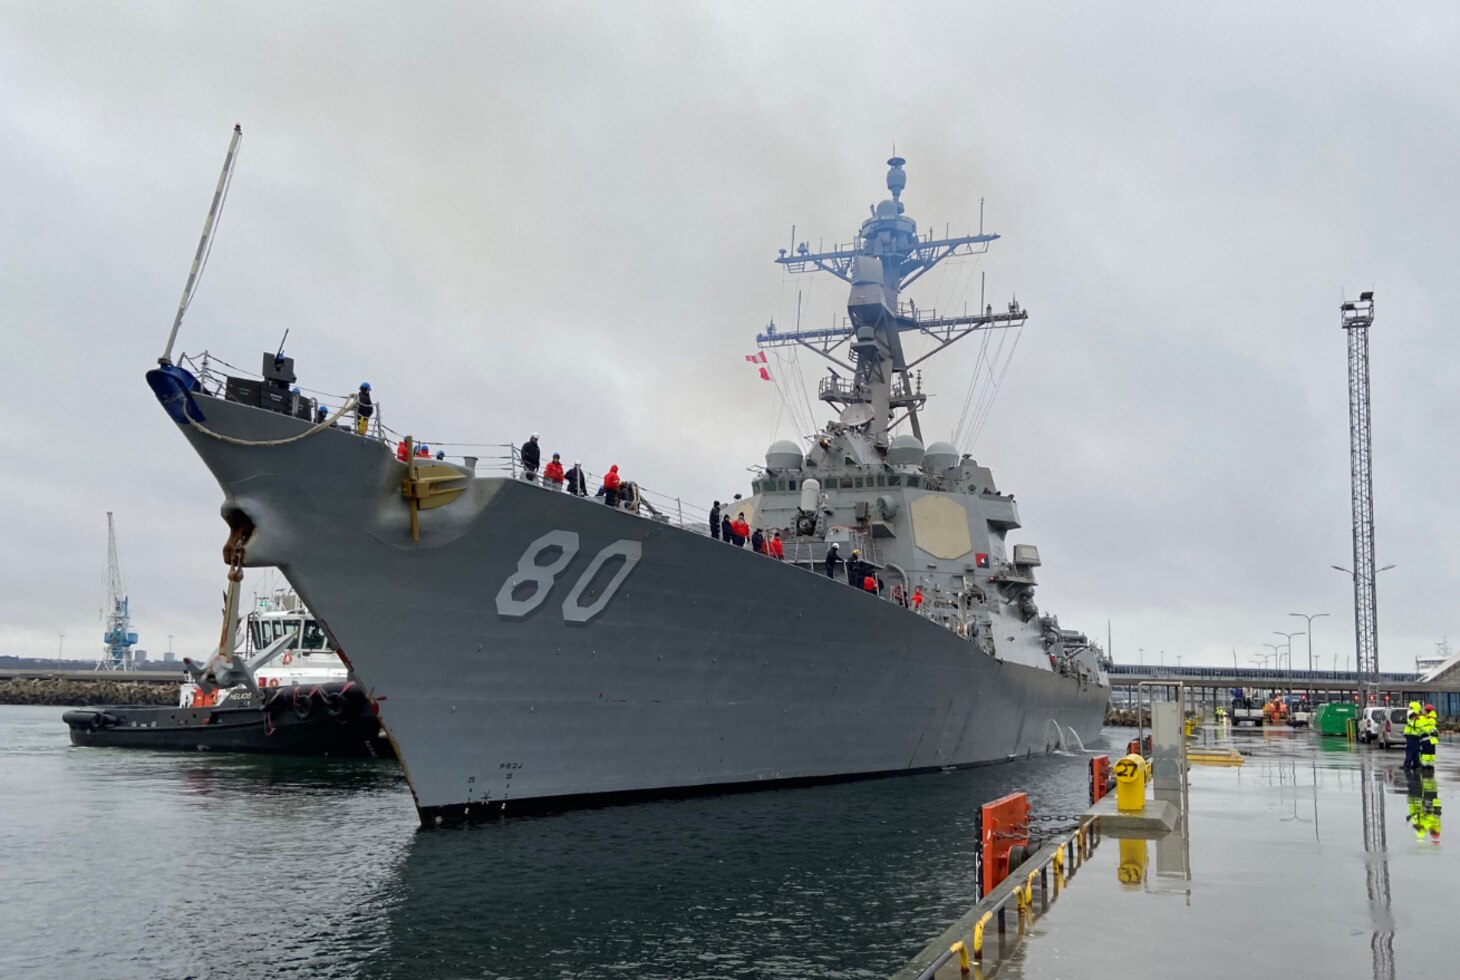 The Arleigh Burke-class guided missile destroyer USS Roosevelt (DDG 80) arrives in Tallinn, Estonia for a regularly scheduled port visit, Jan. 17, 2023. Roosevelt is on a scheduled deployment in the U.S. Naval Forces Europe area of operations, employed by U.S. Sixth Fleet to defend U.S., allied and partner interests.